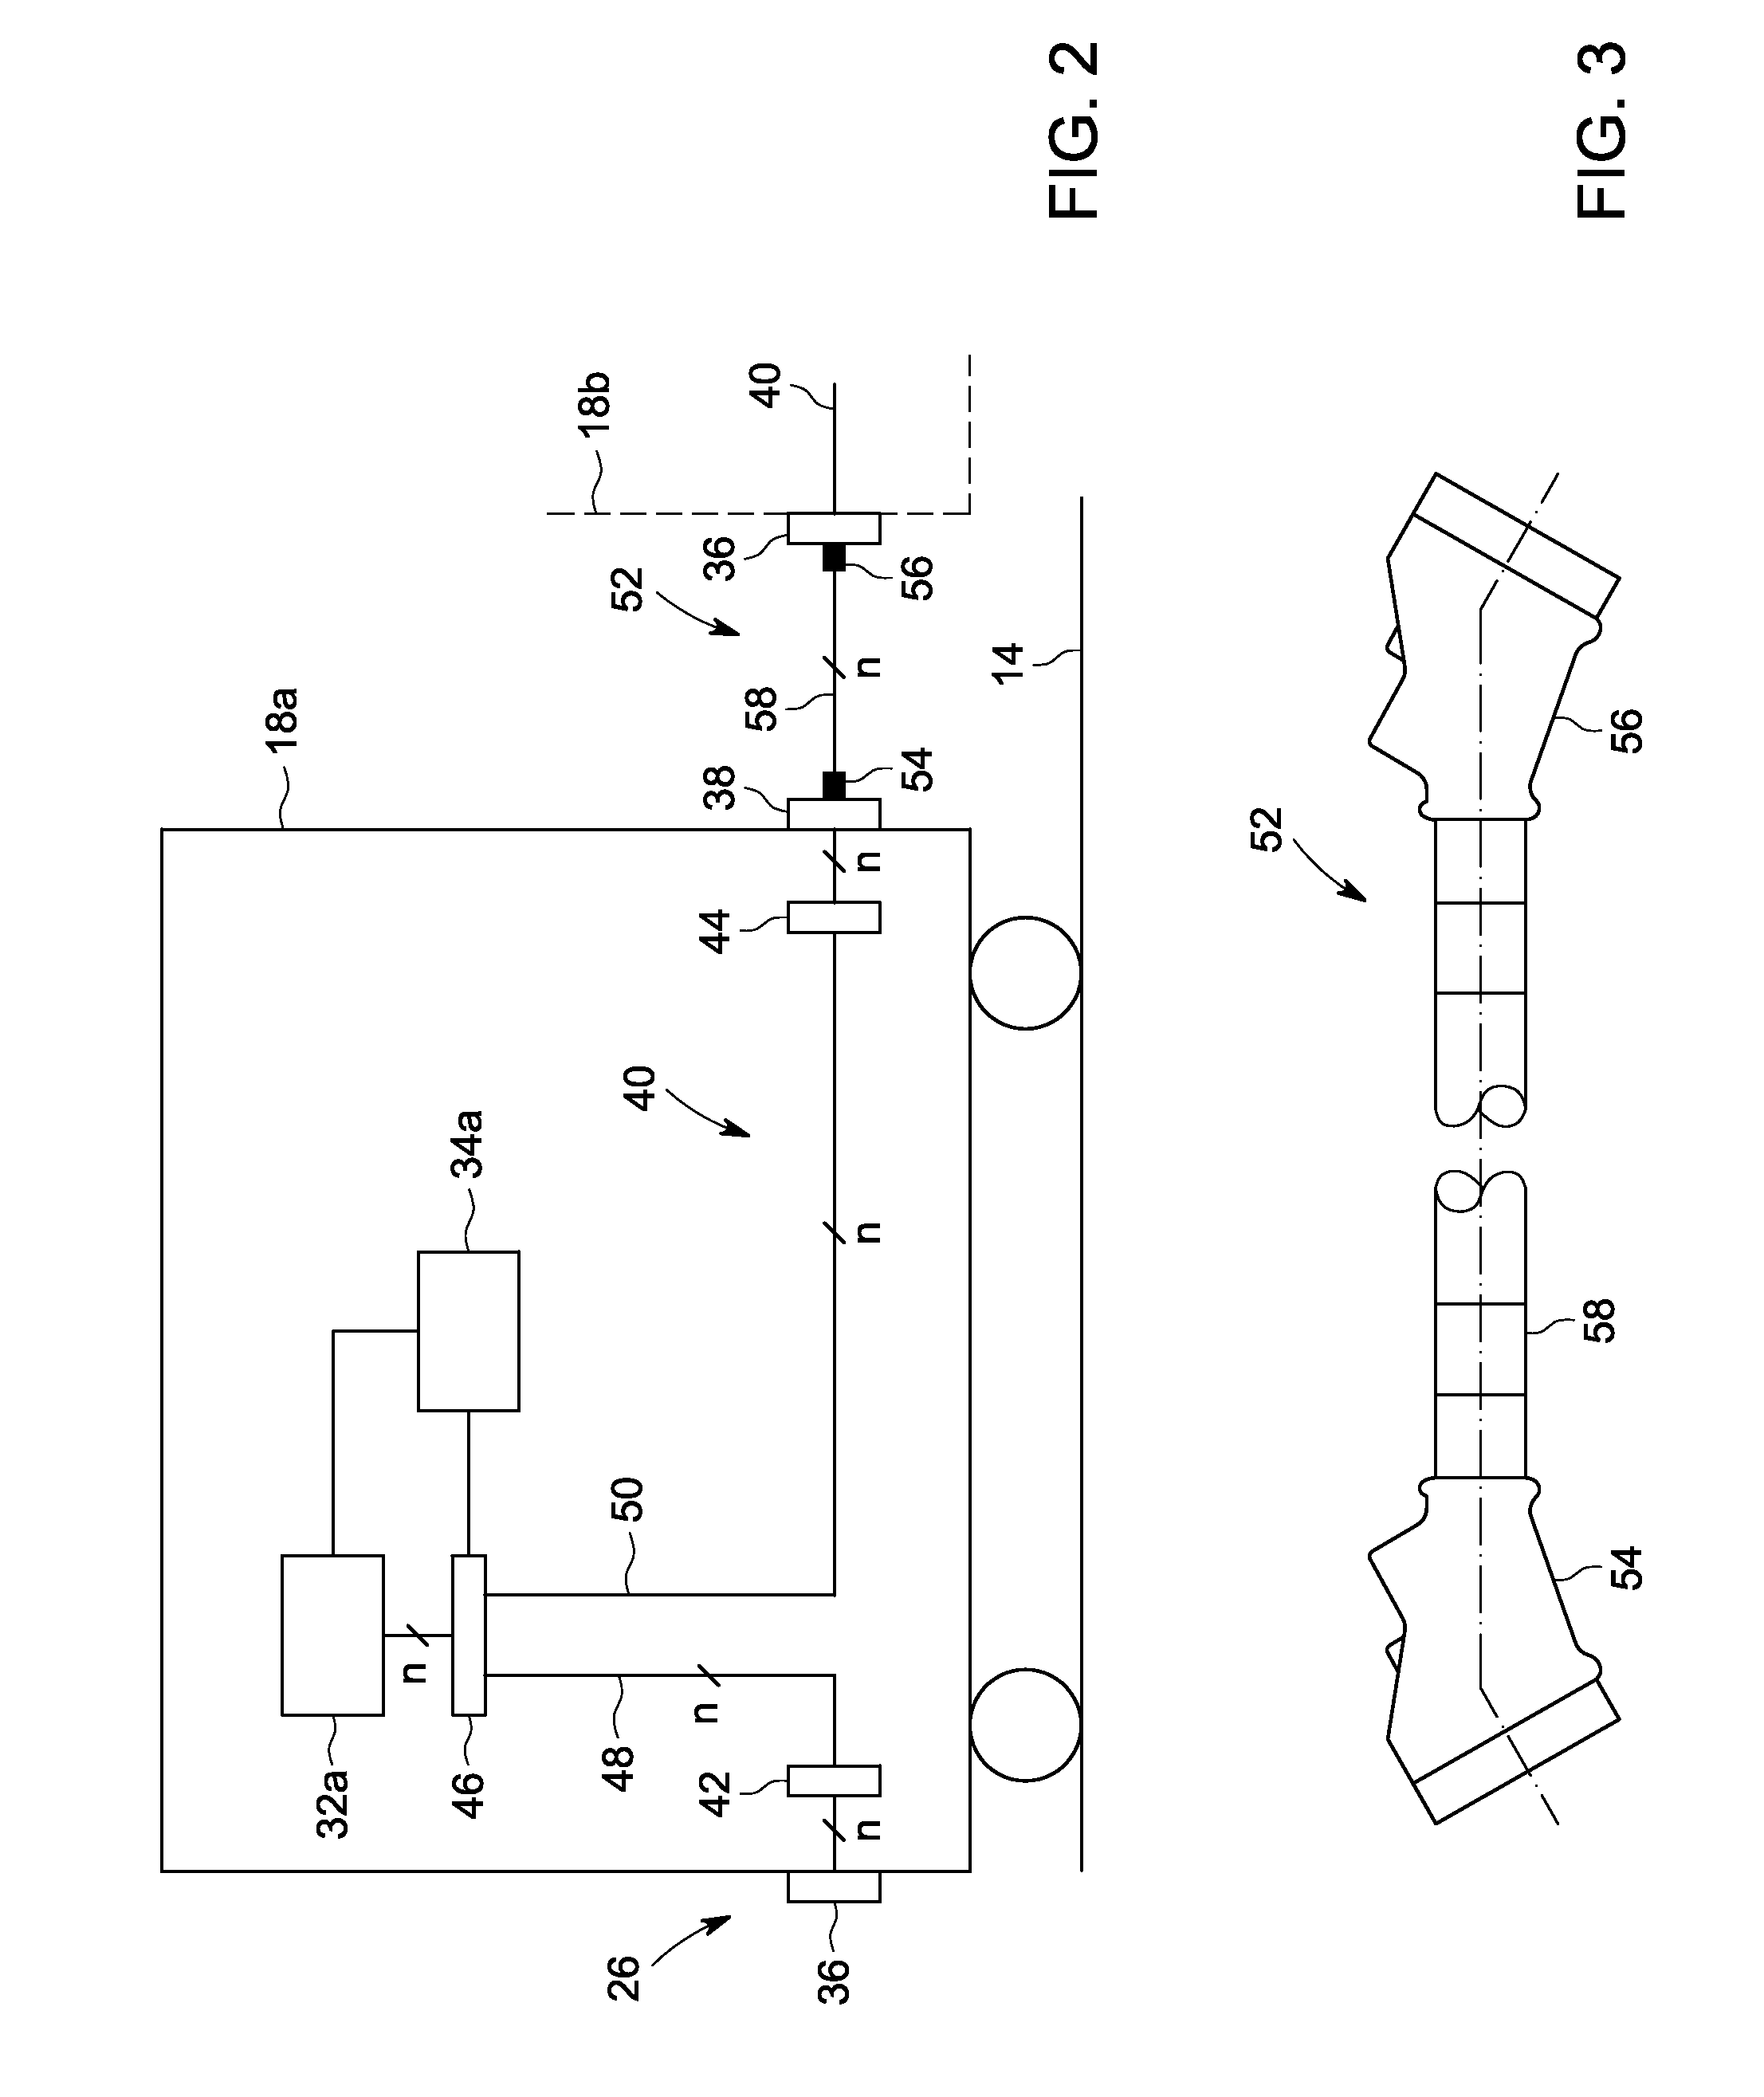 System and method for communicating data in locomotive consist or other vehicle consist